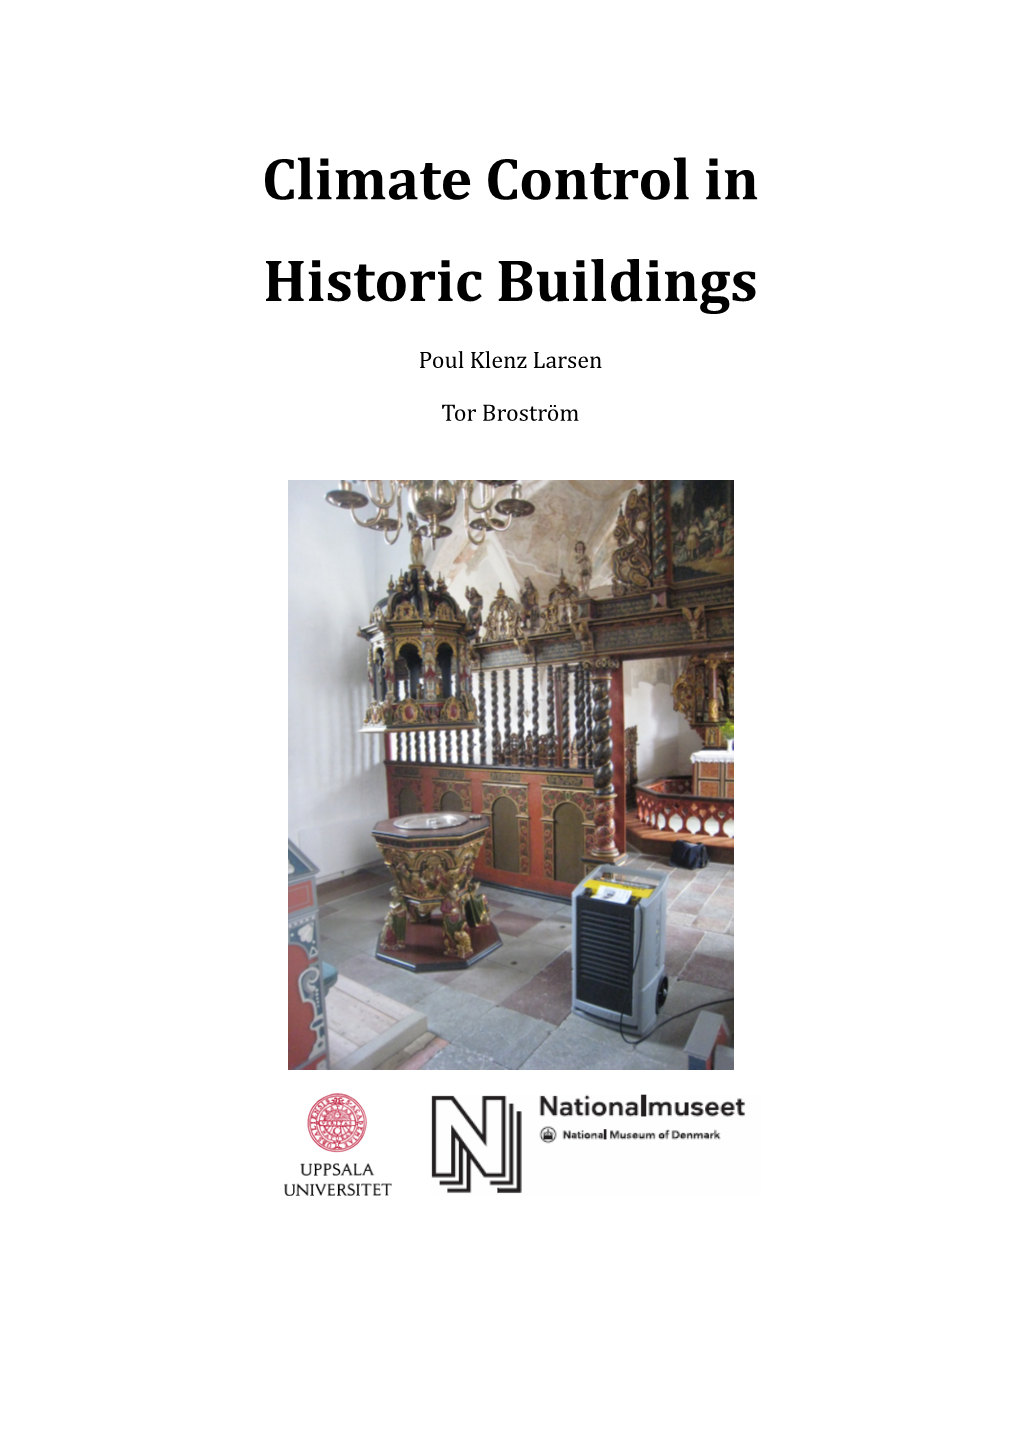 Climate Control in Historic Buildings